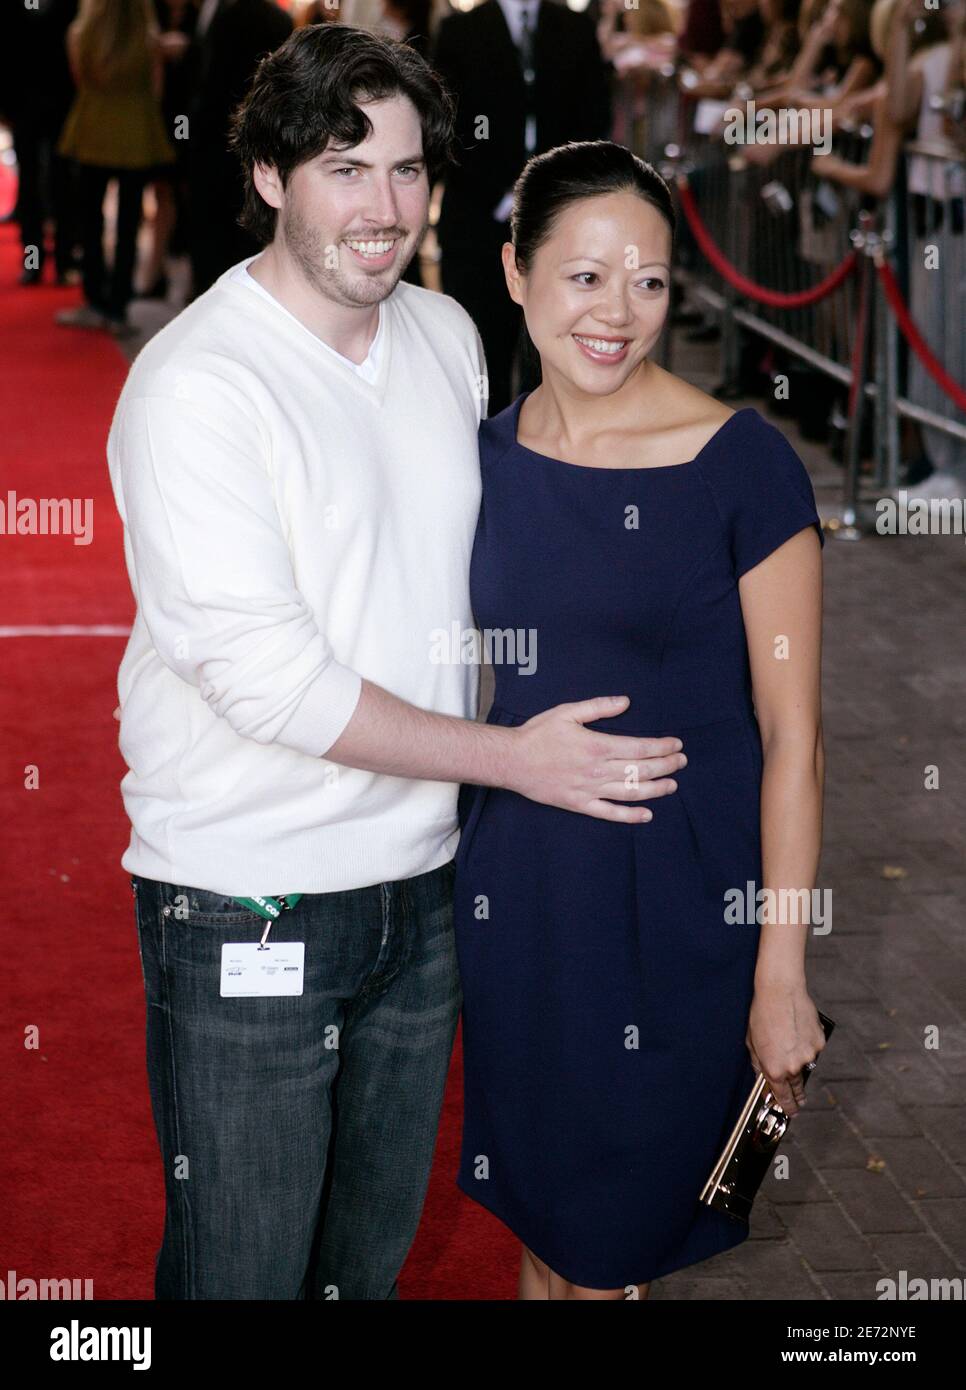 Actor Jason Reitman and his wife Michele Lee arrive for the premiere gala  of the film 